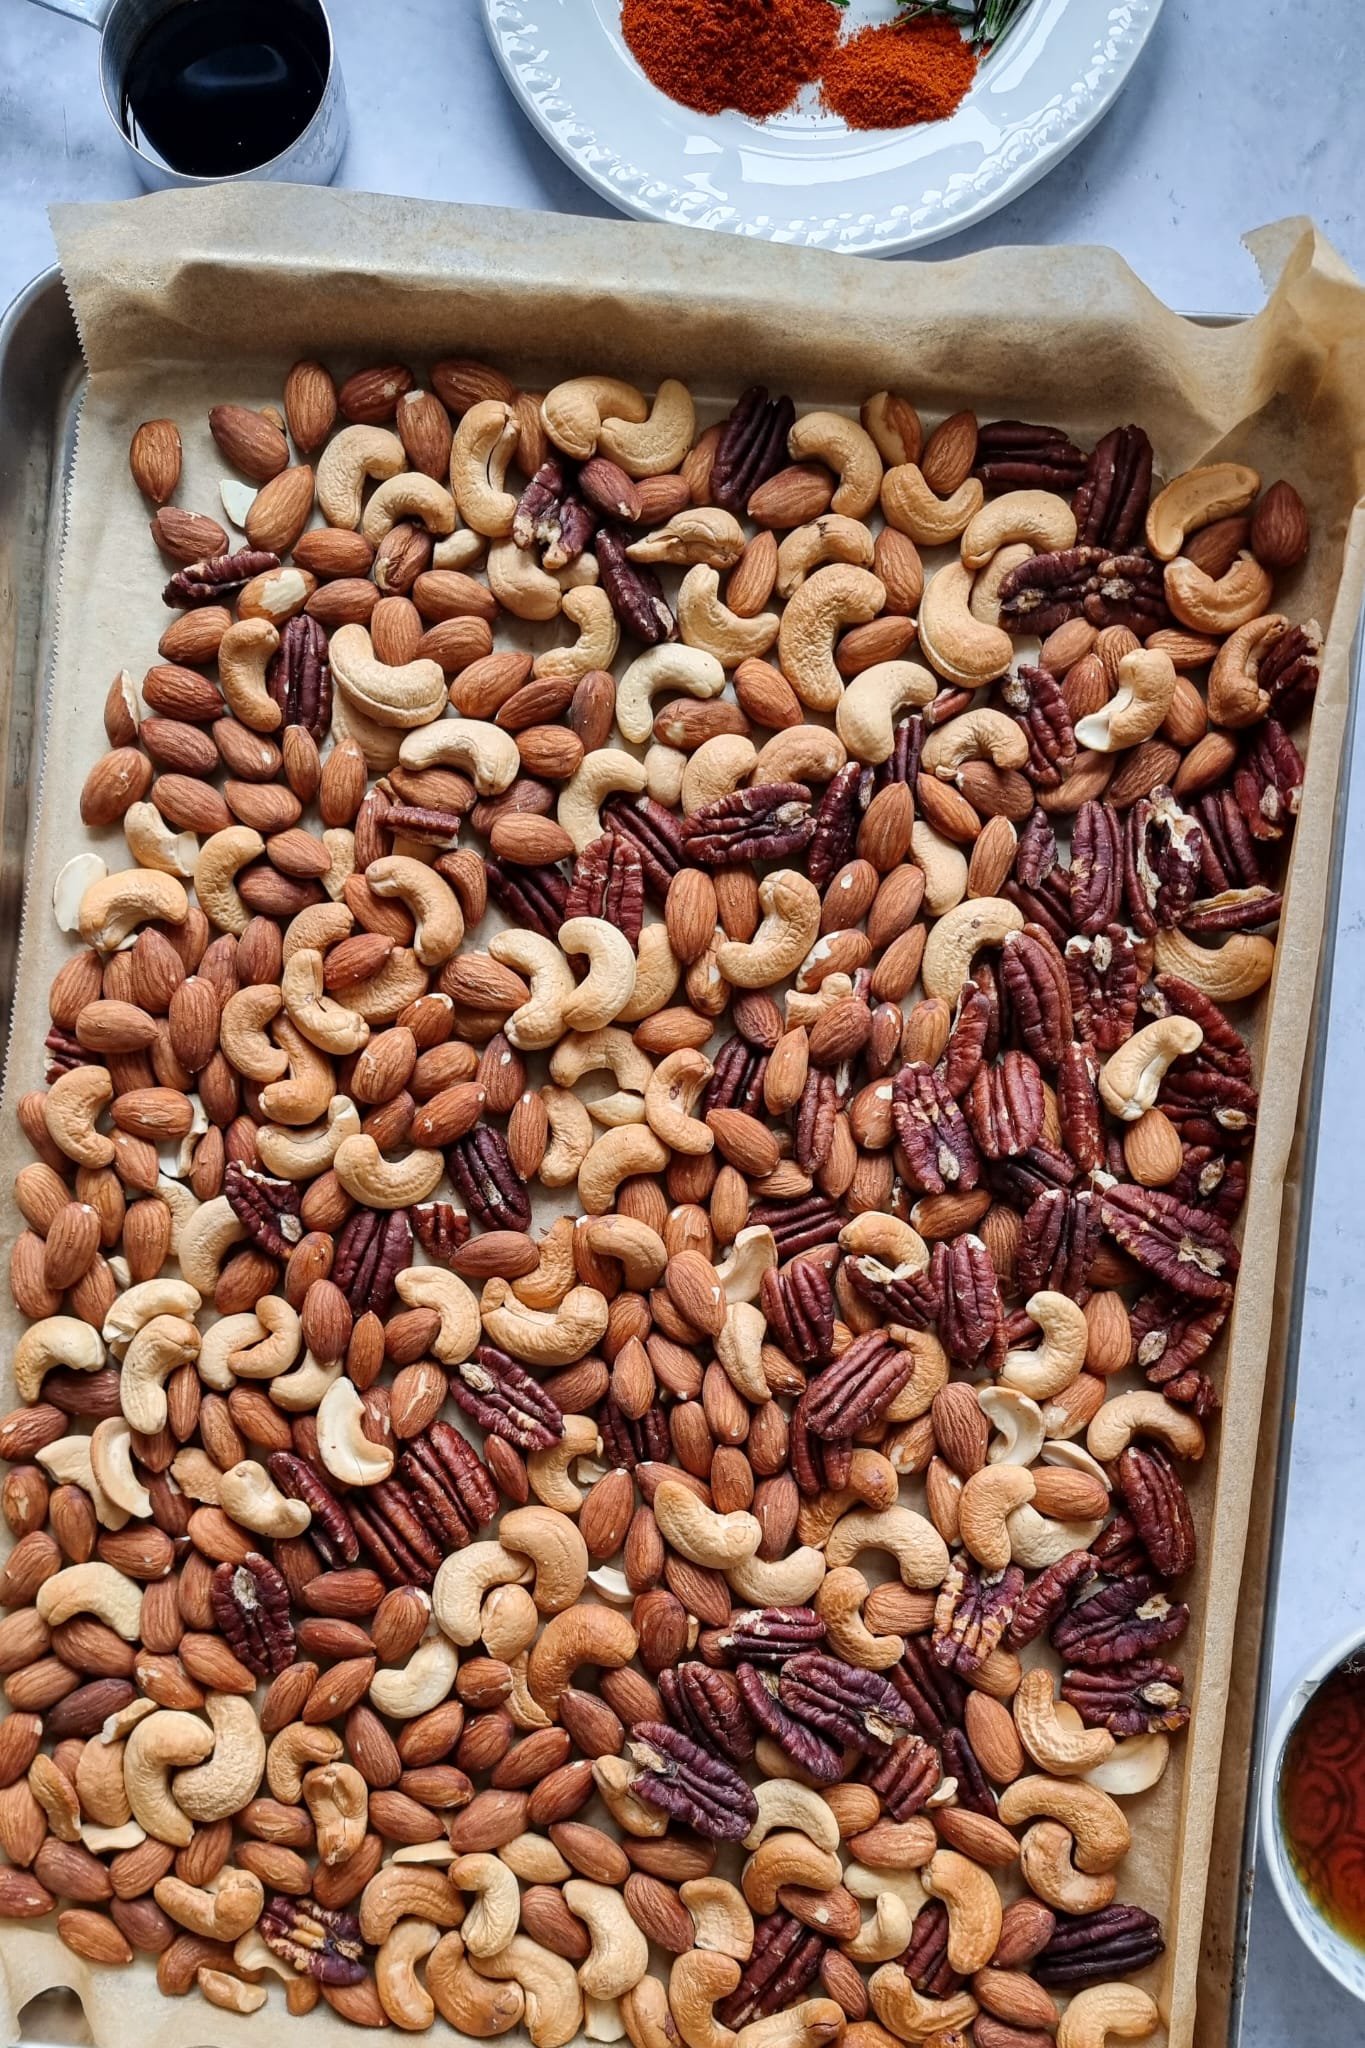 Roasted cashews, almonds and pecans in Sweet and Savoury Spiced Nuts And Pretzels recipe